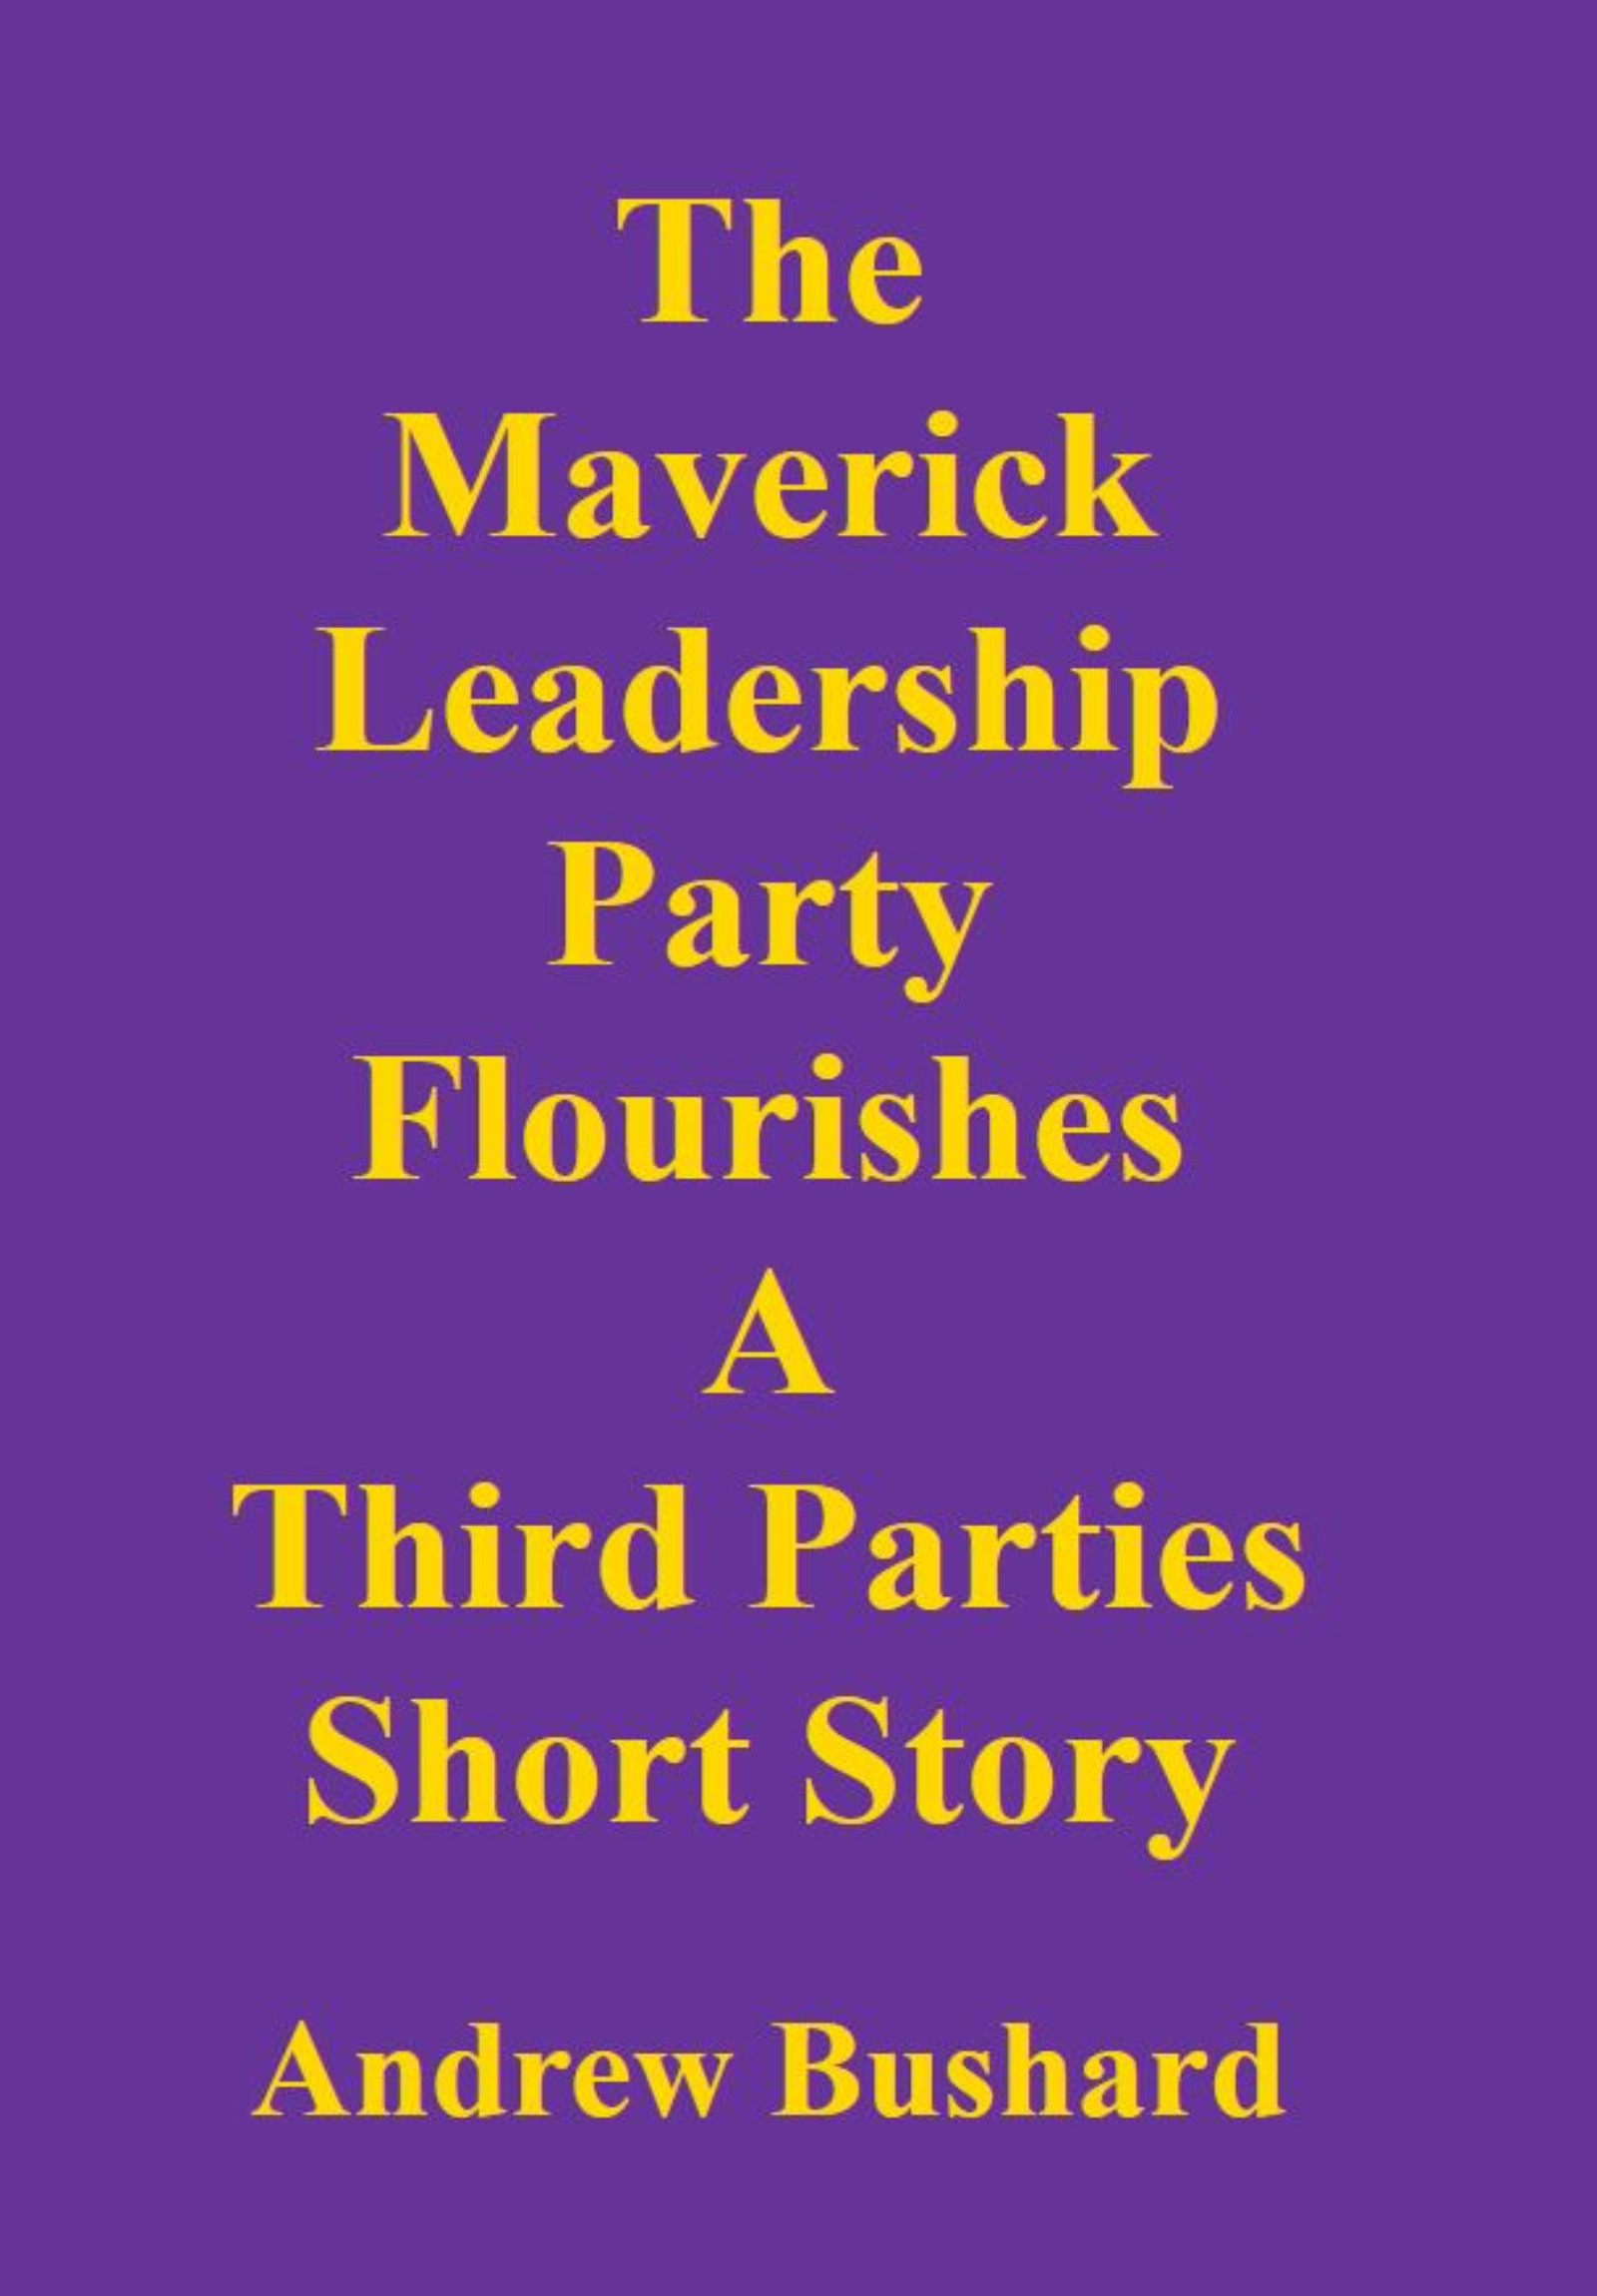 The Maverick Leadership Party Flourishes: A Third Parties Short Story's featured image